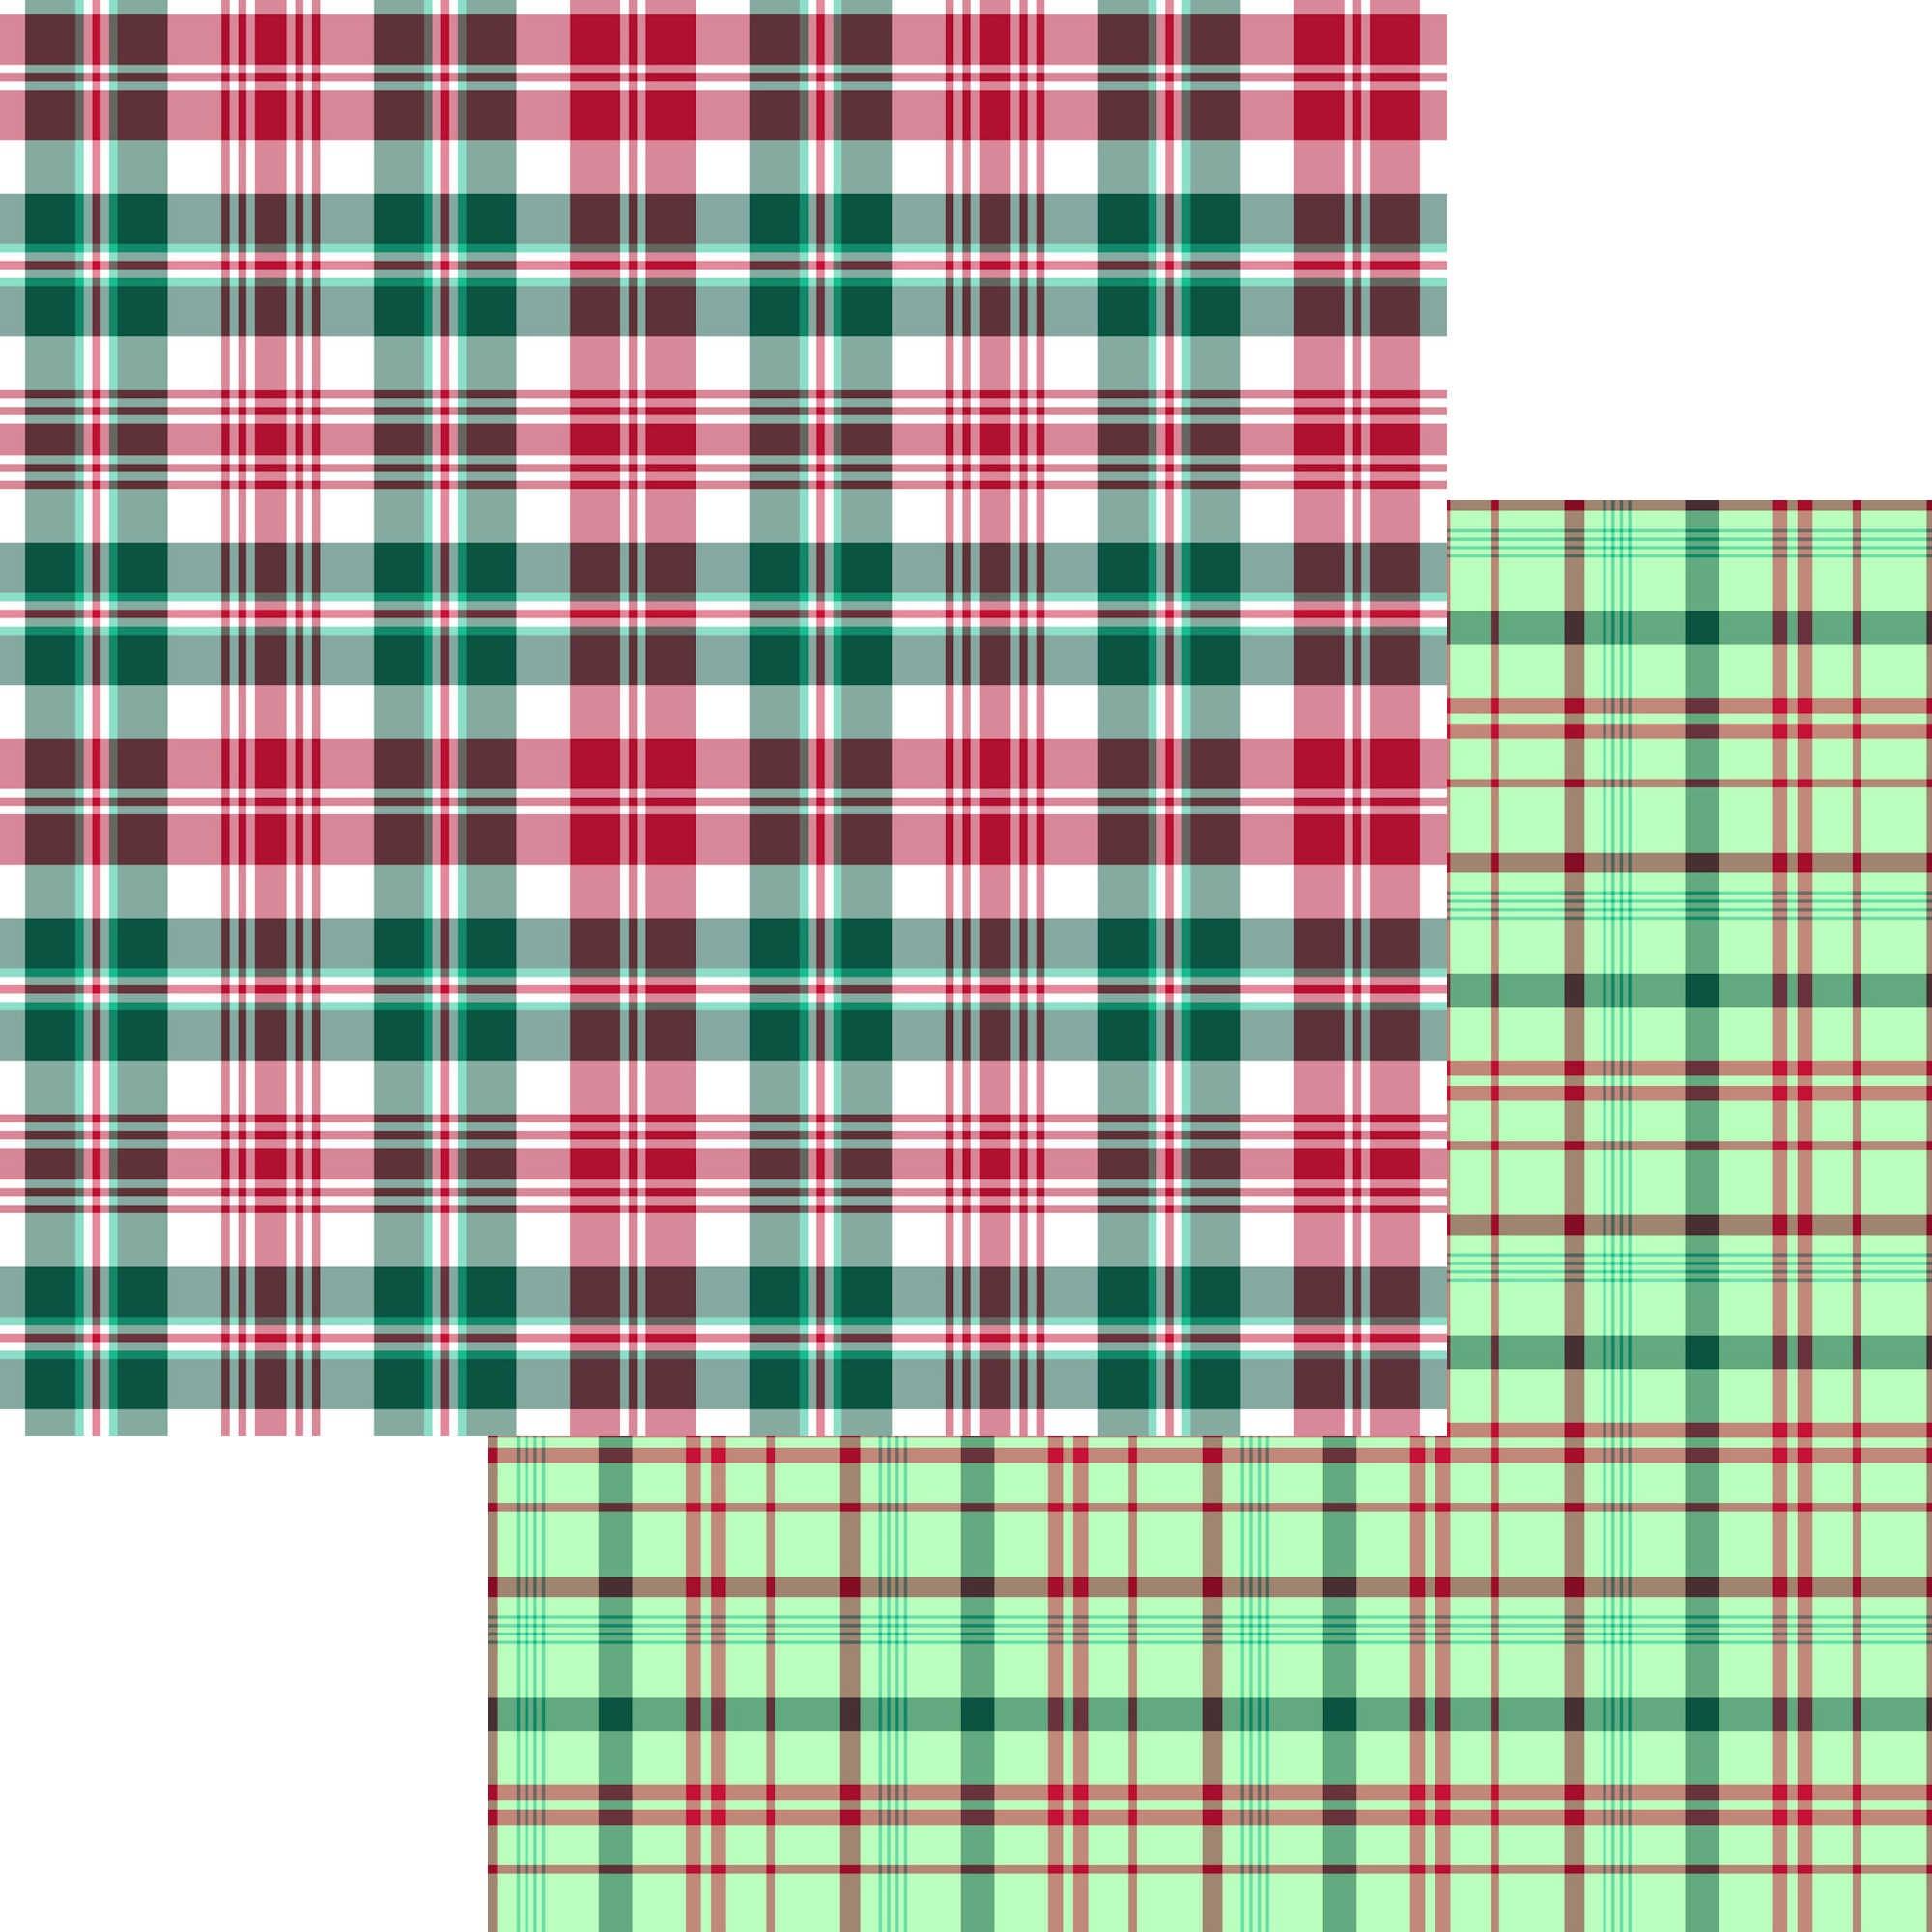 Christmas Patterns Collection Plaid Green 12 x 12 Double-Sided Scrapbook Paper by SSC Designs - Scrapbook Supply Companies